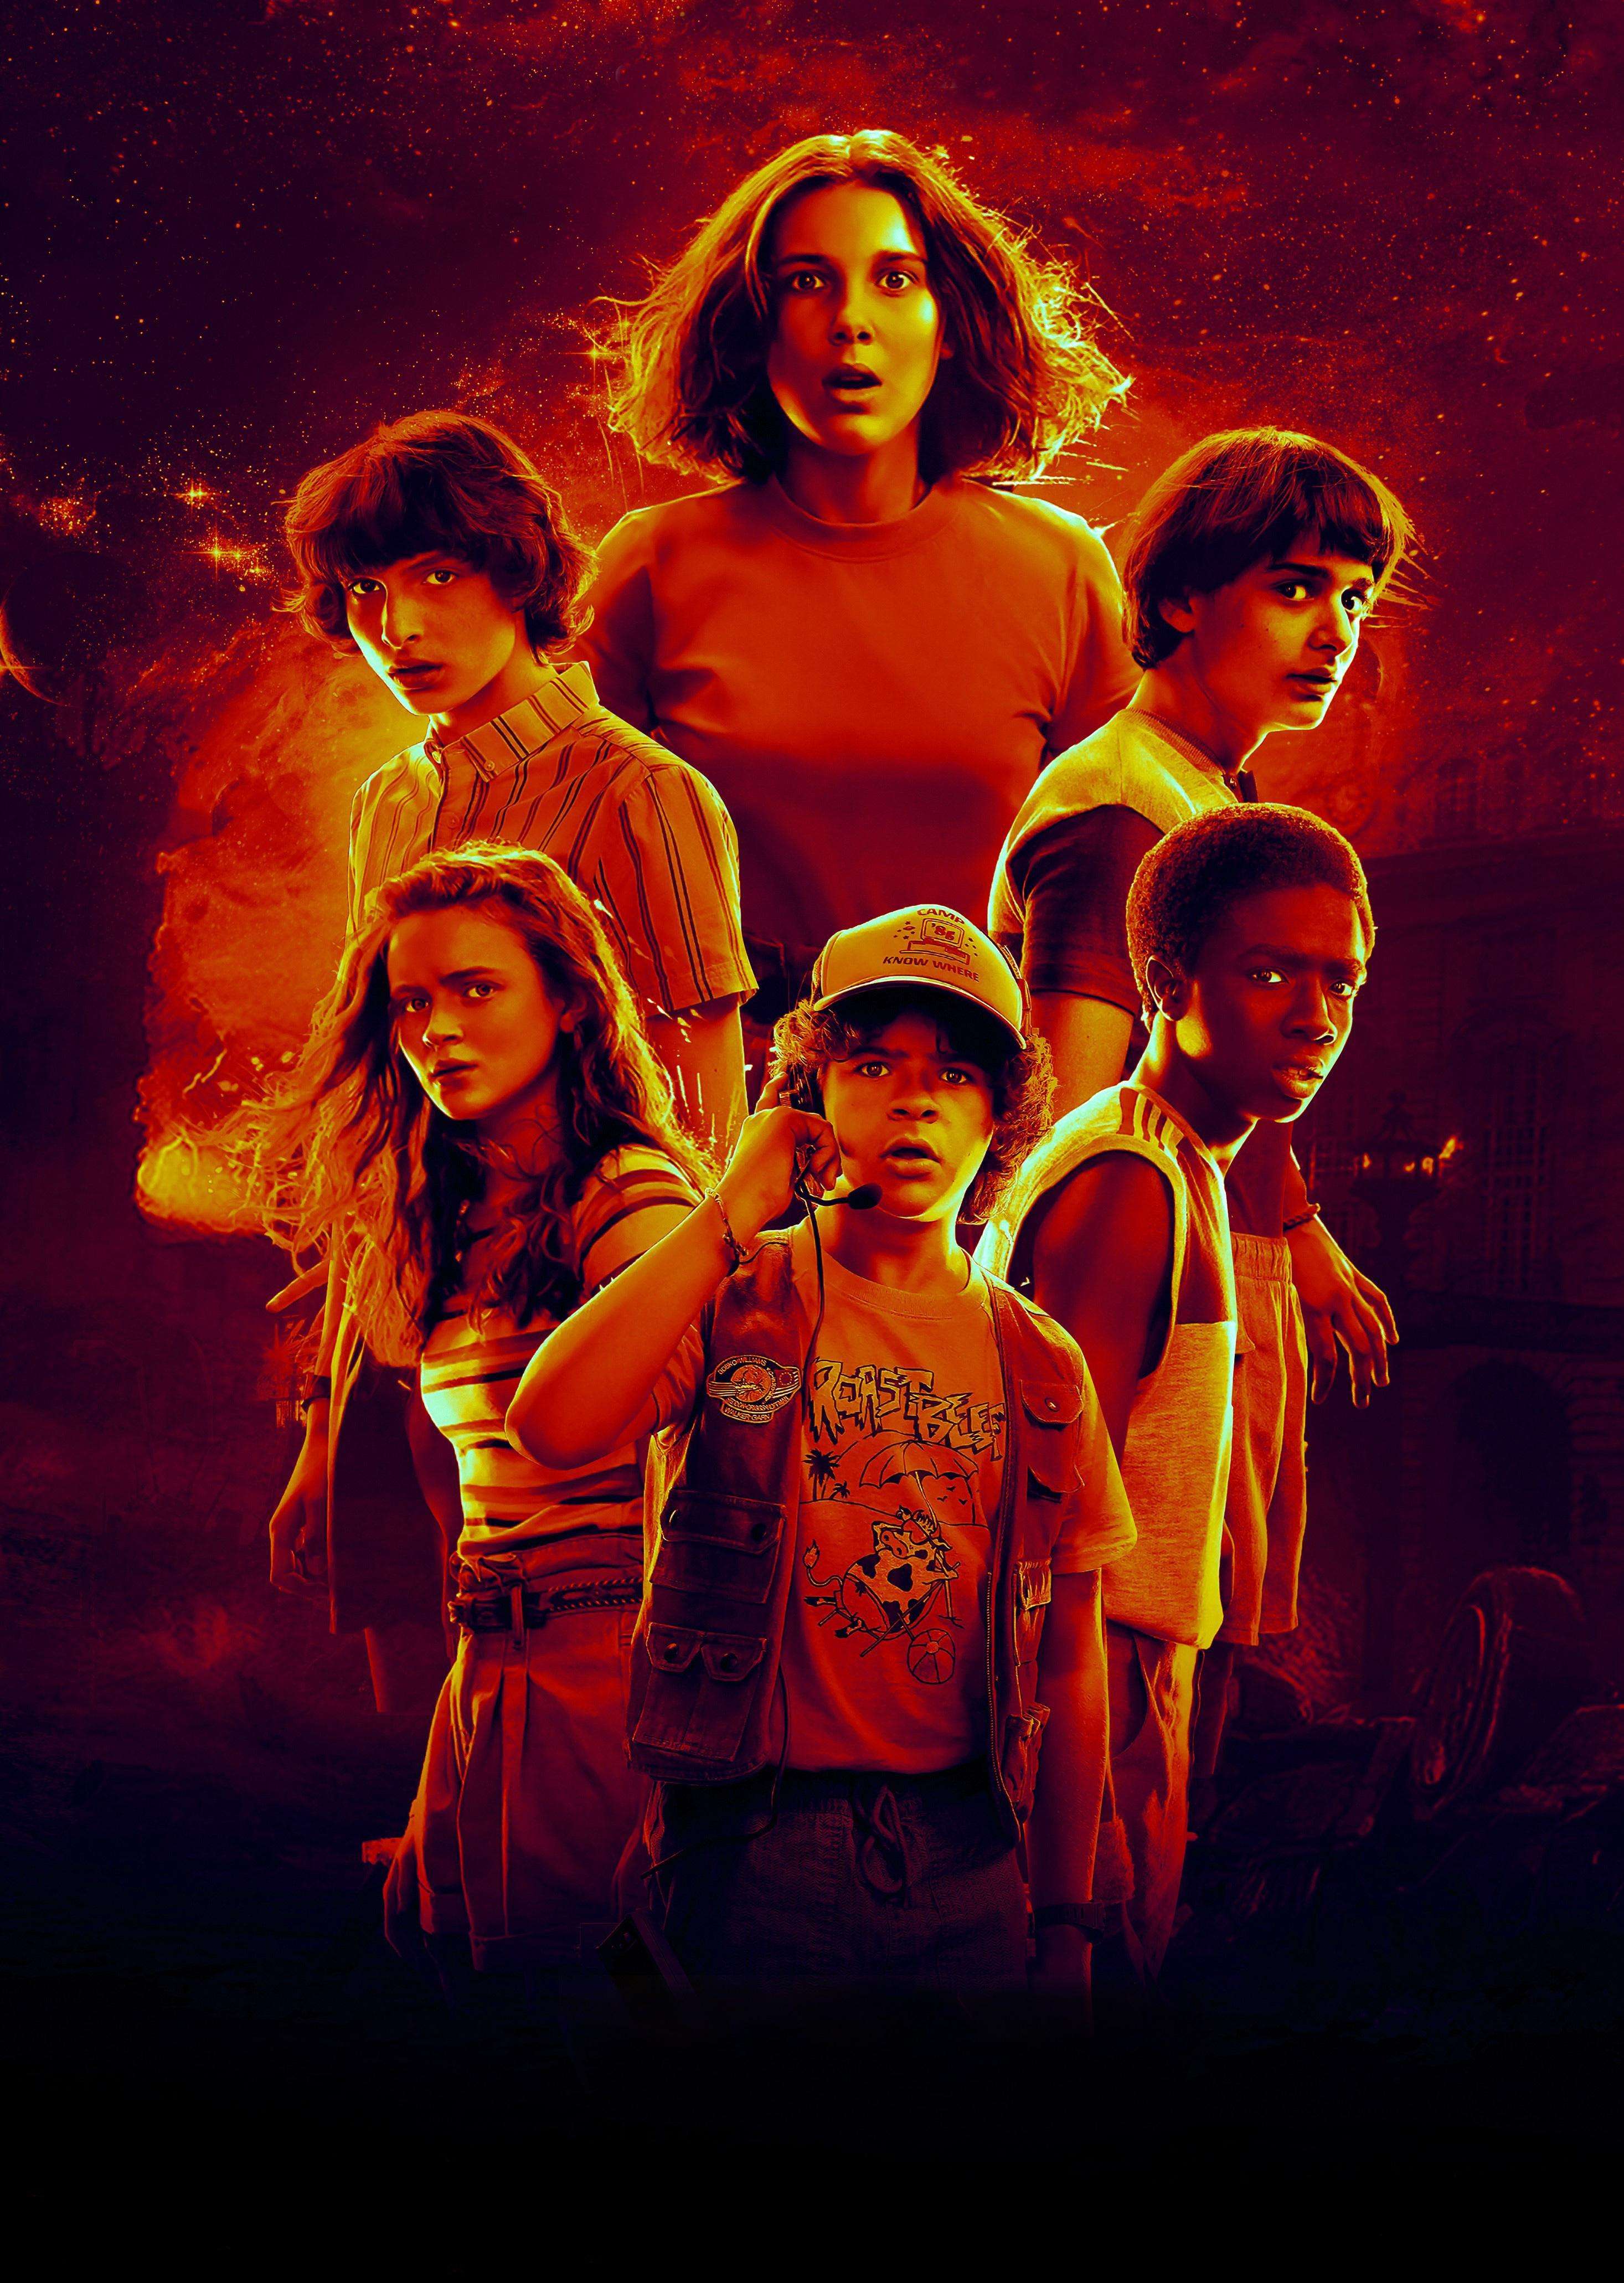 Millie Bobby Brown As Eleven Stranger Things 3 Poster Wallpapers